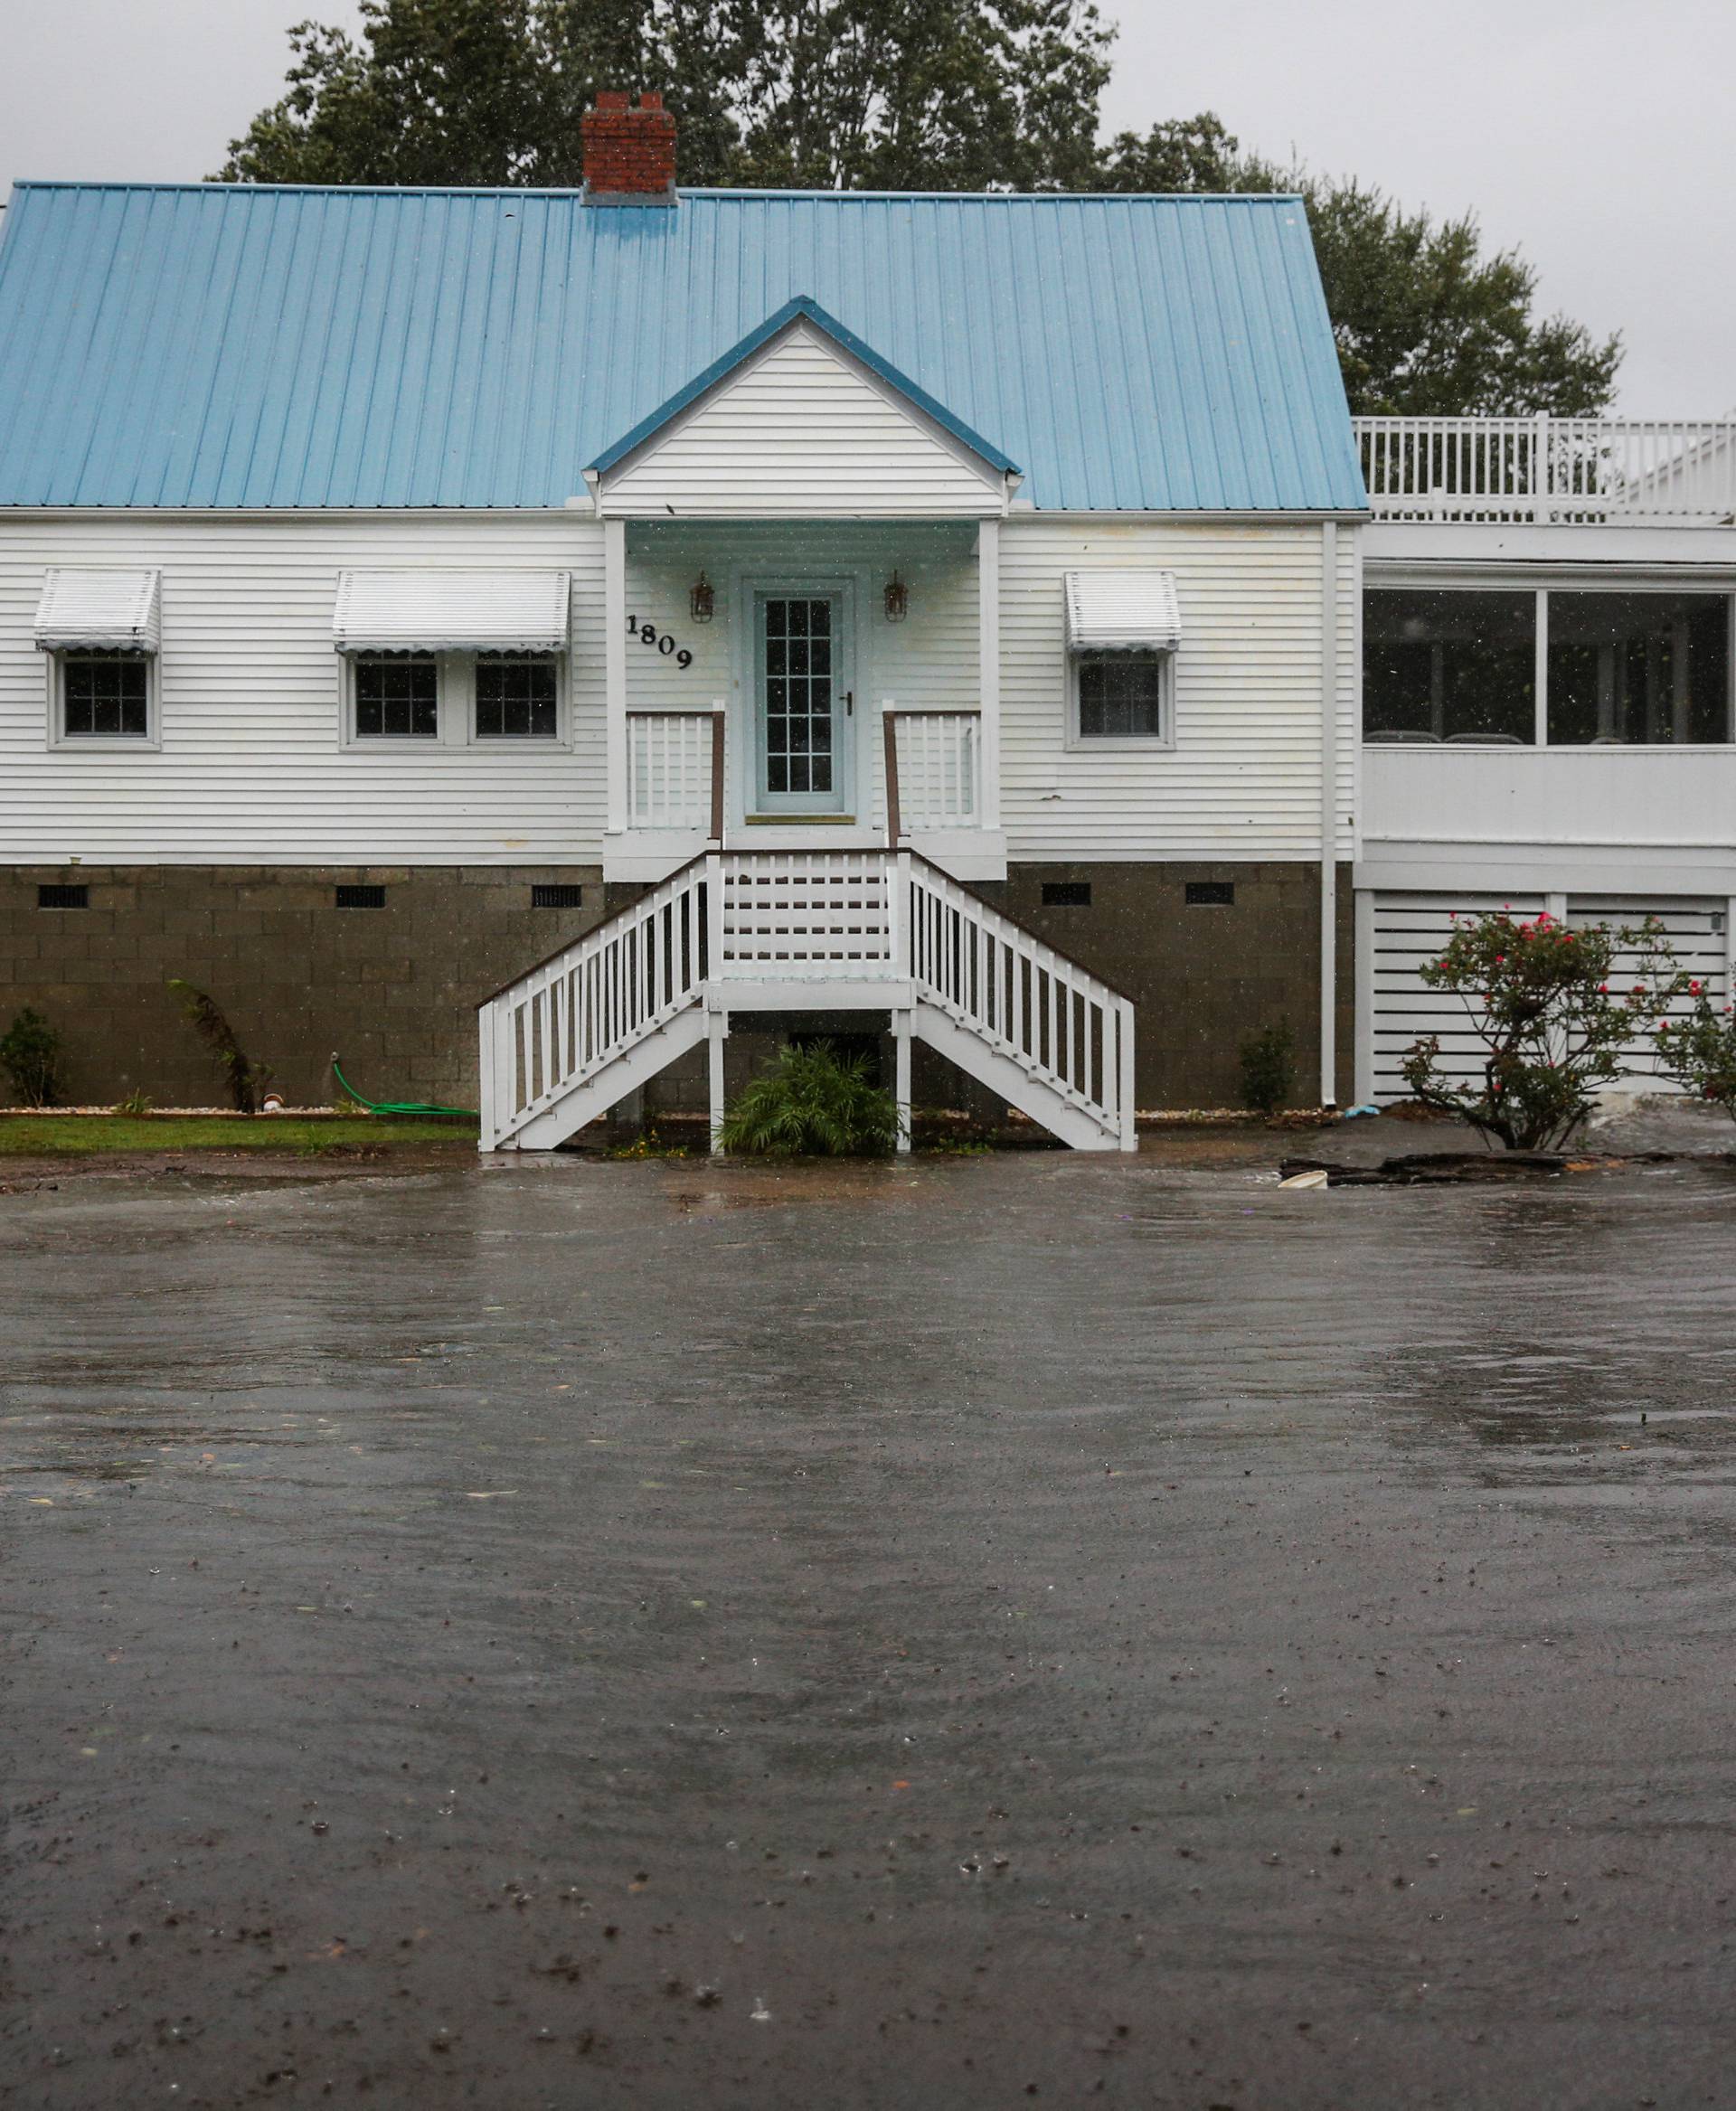 Water from Neuse River floods houses as Hurricane Florence comes ashore in New Bern